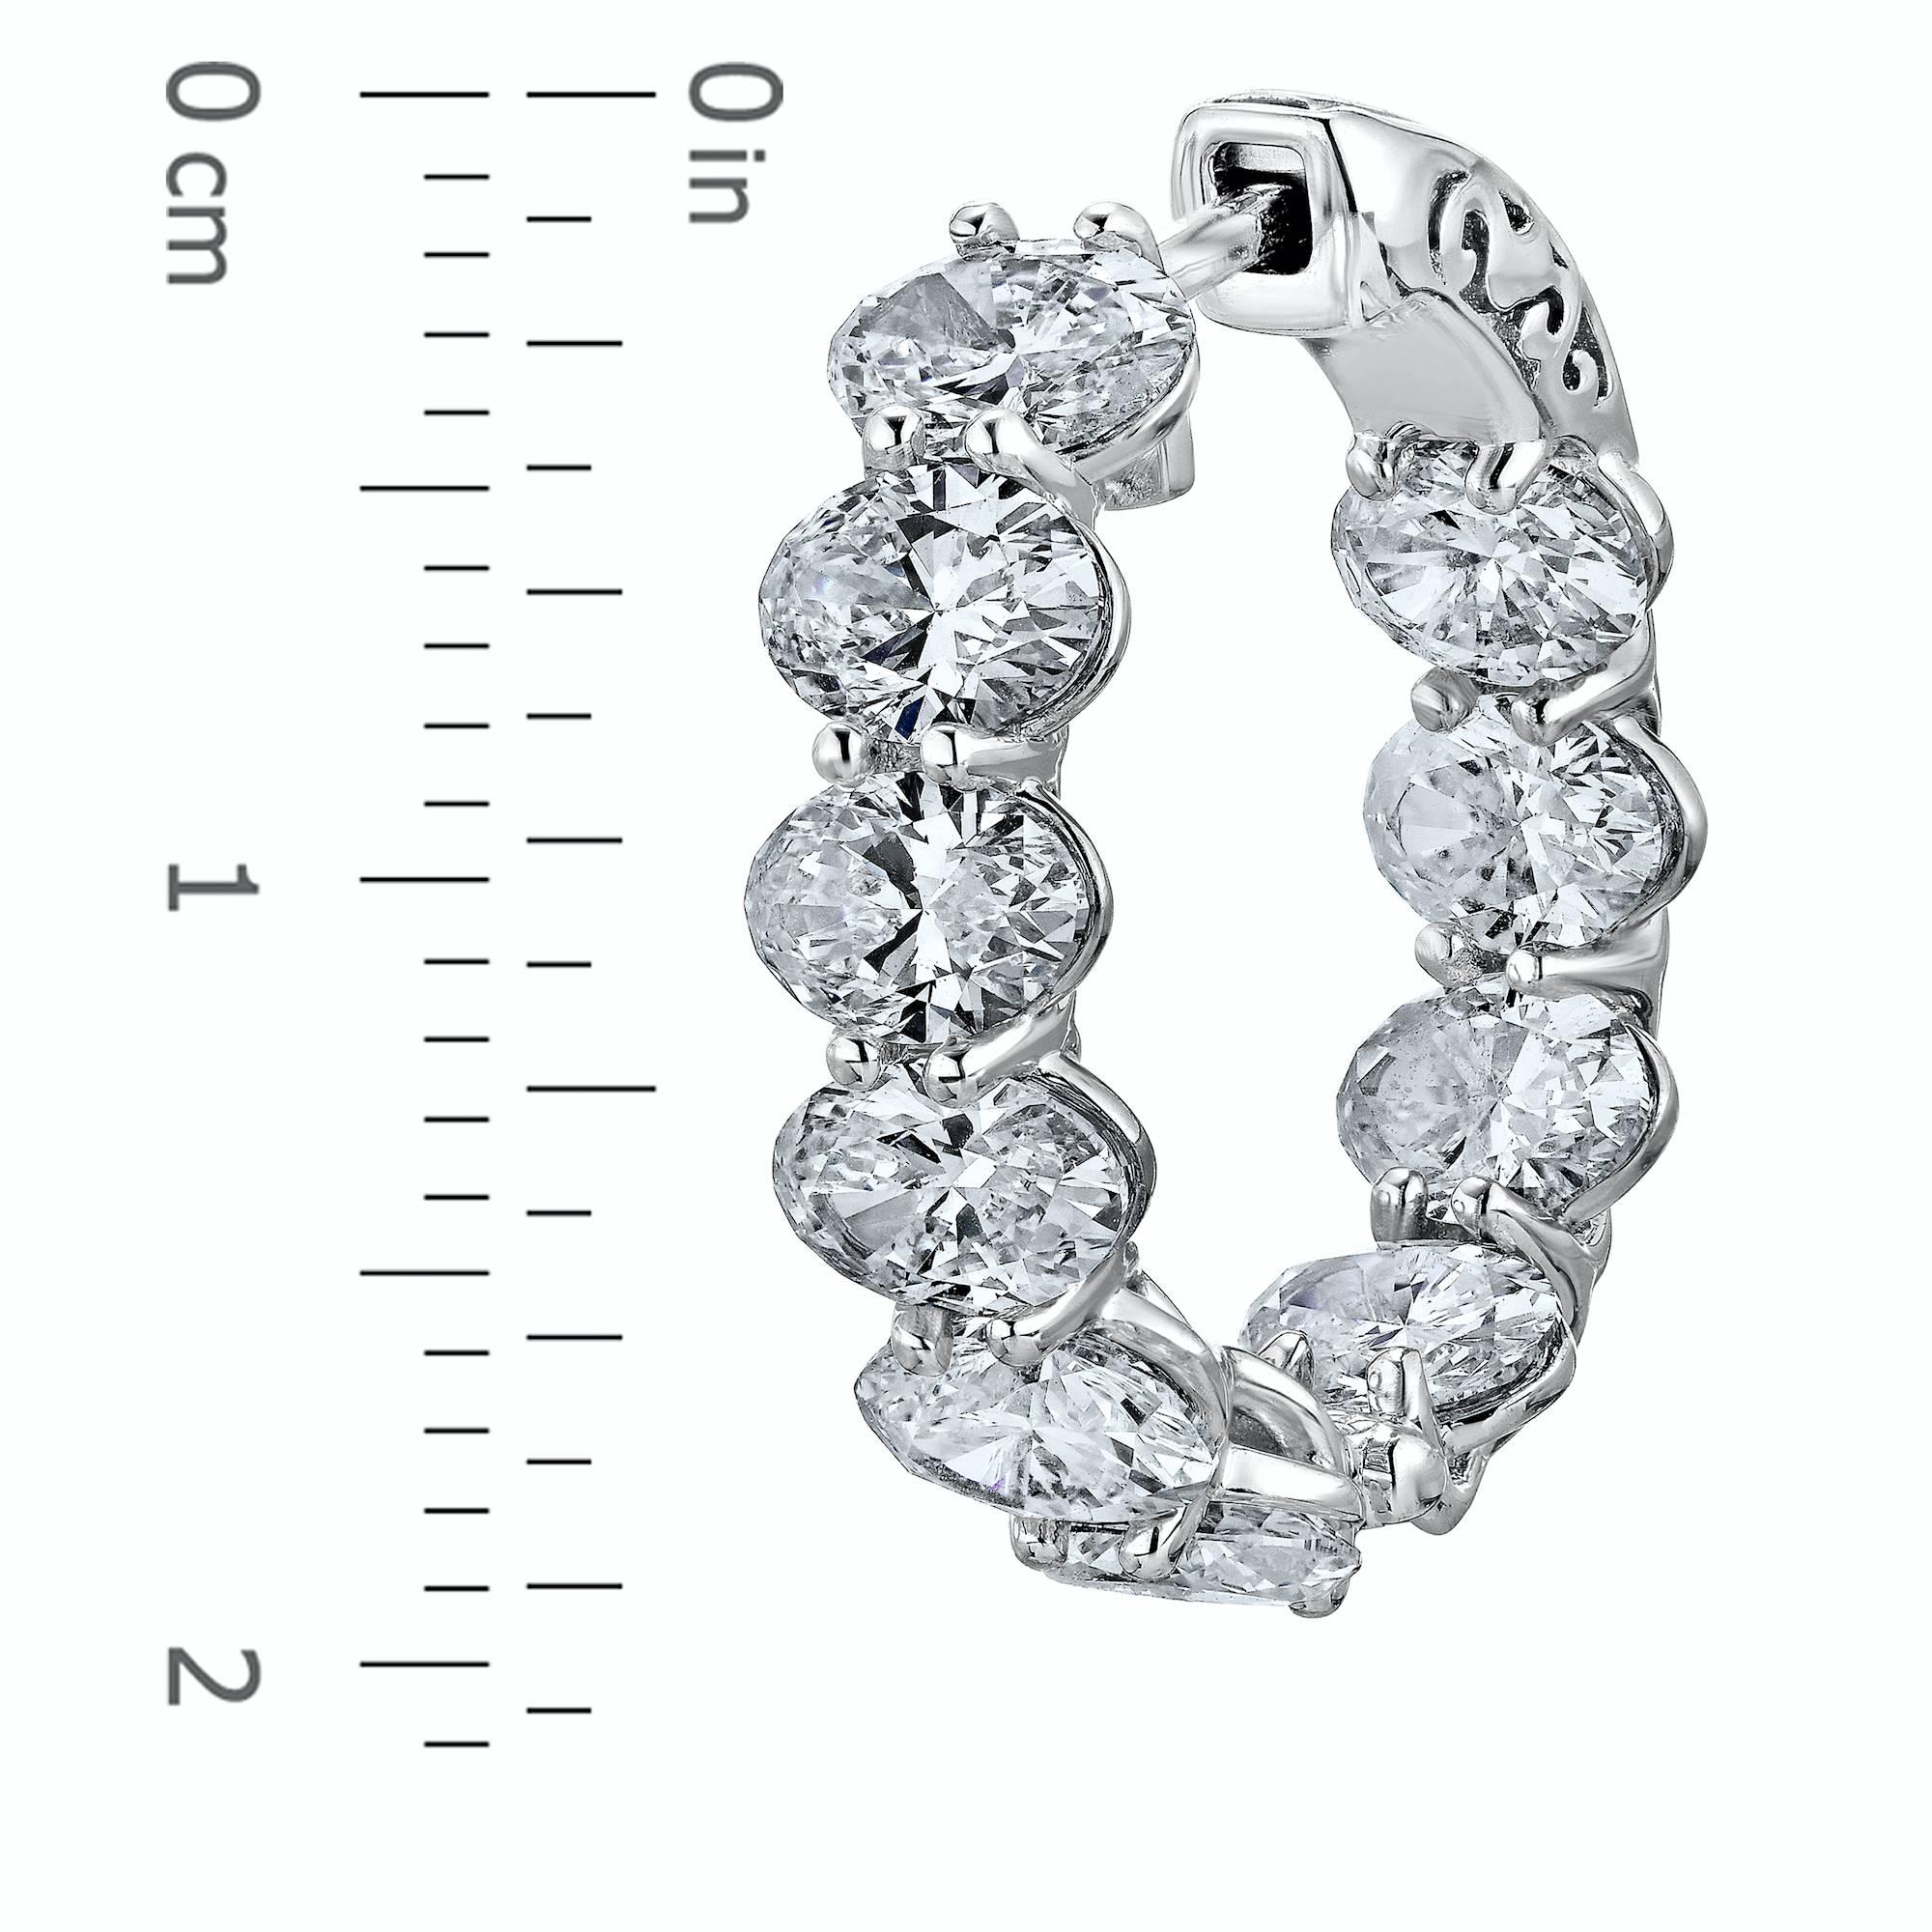 Unique Oval Shaped Diamonds Set in our one and only hand made diamond hoops. In addition to the diamonds being oval shaped, we also made this earring oval so that the inside diamonds would be even more visible. 
Approx total weight: 5.36ct
Diamond